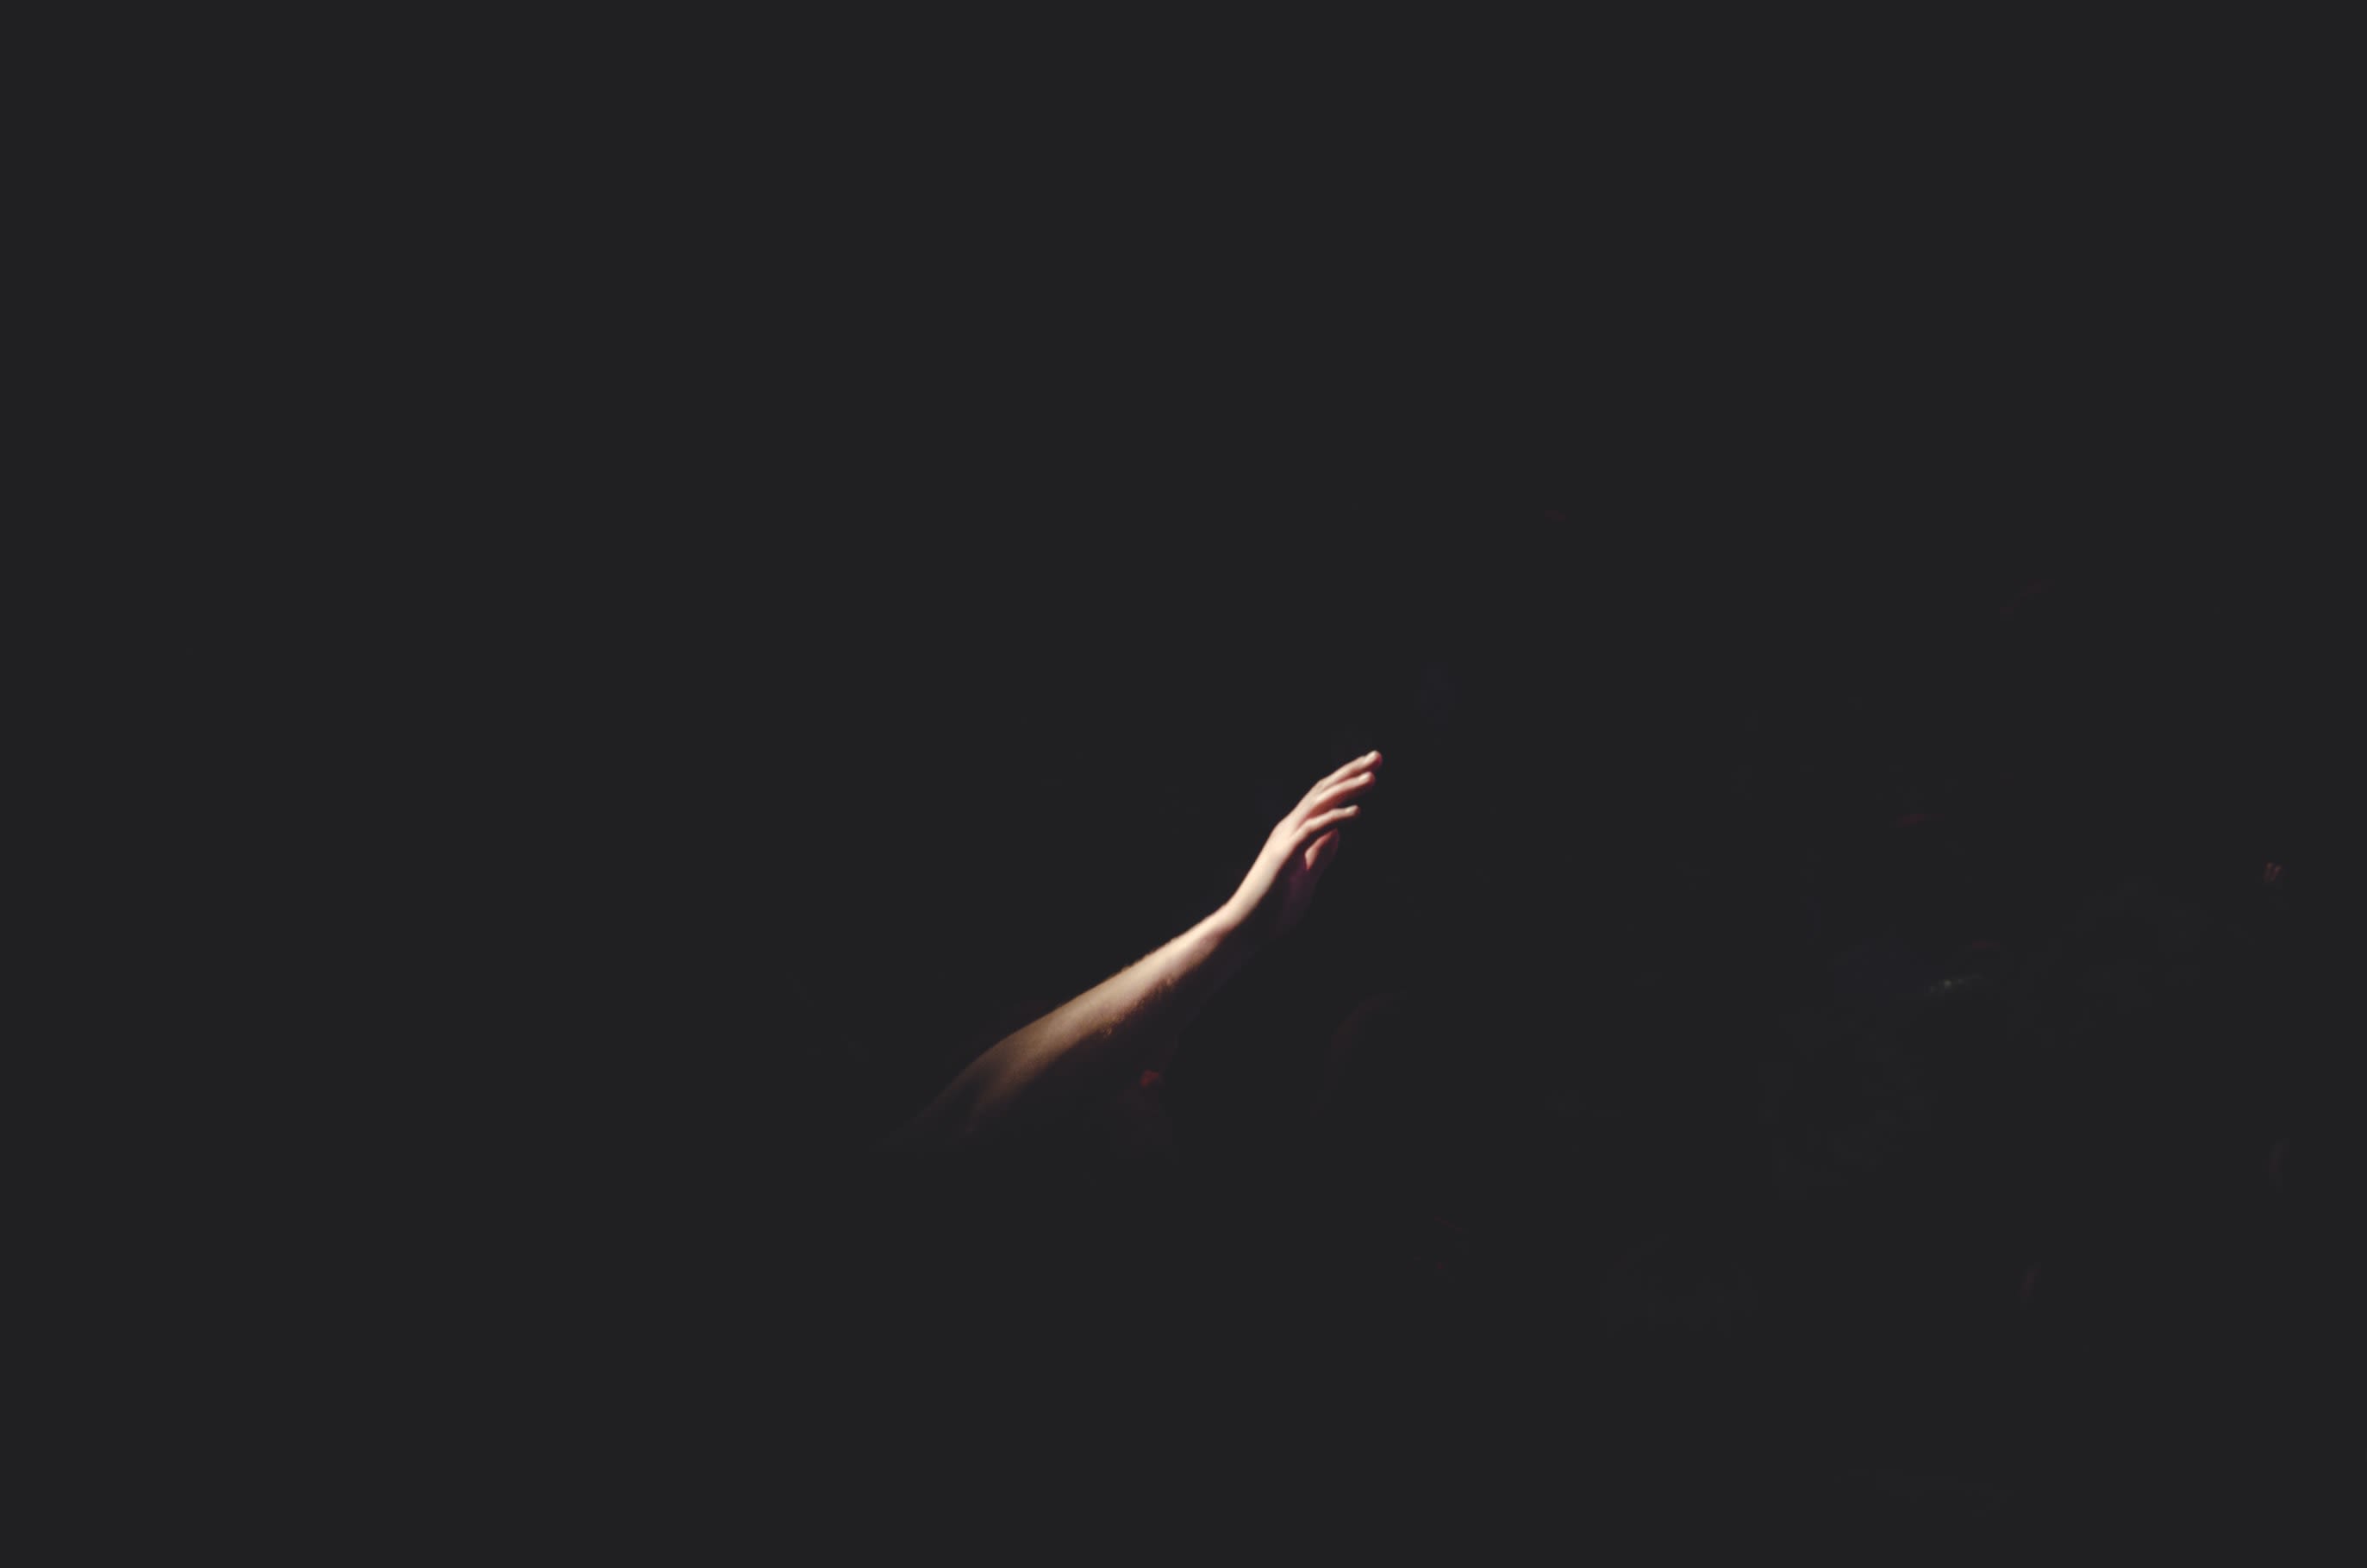 Hand reaching out for help in the darkness